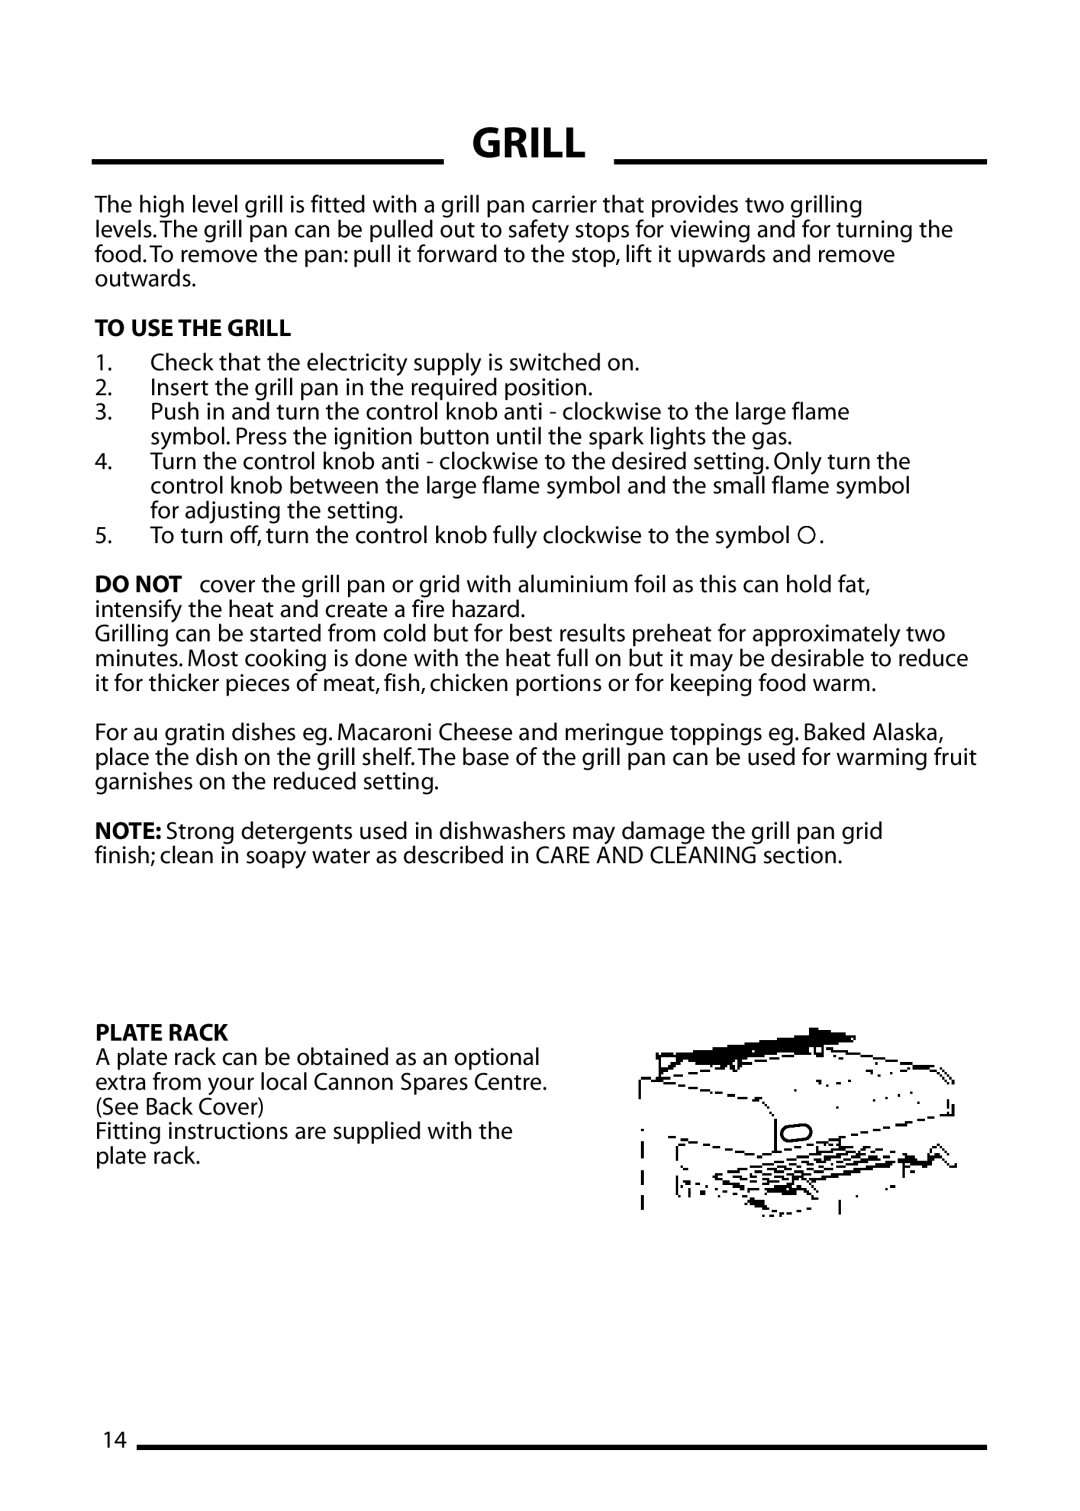 Cannon 4466200024-01 installation instructions To Use The Grill, Plate Rack 